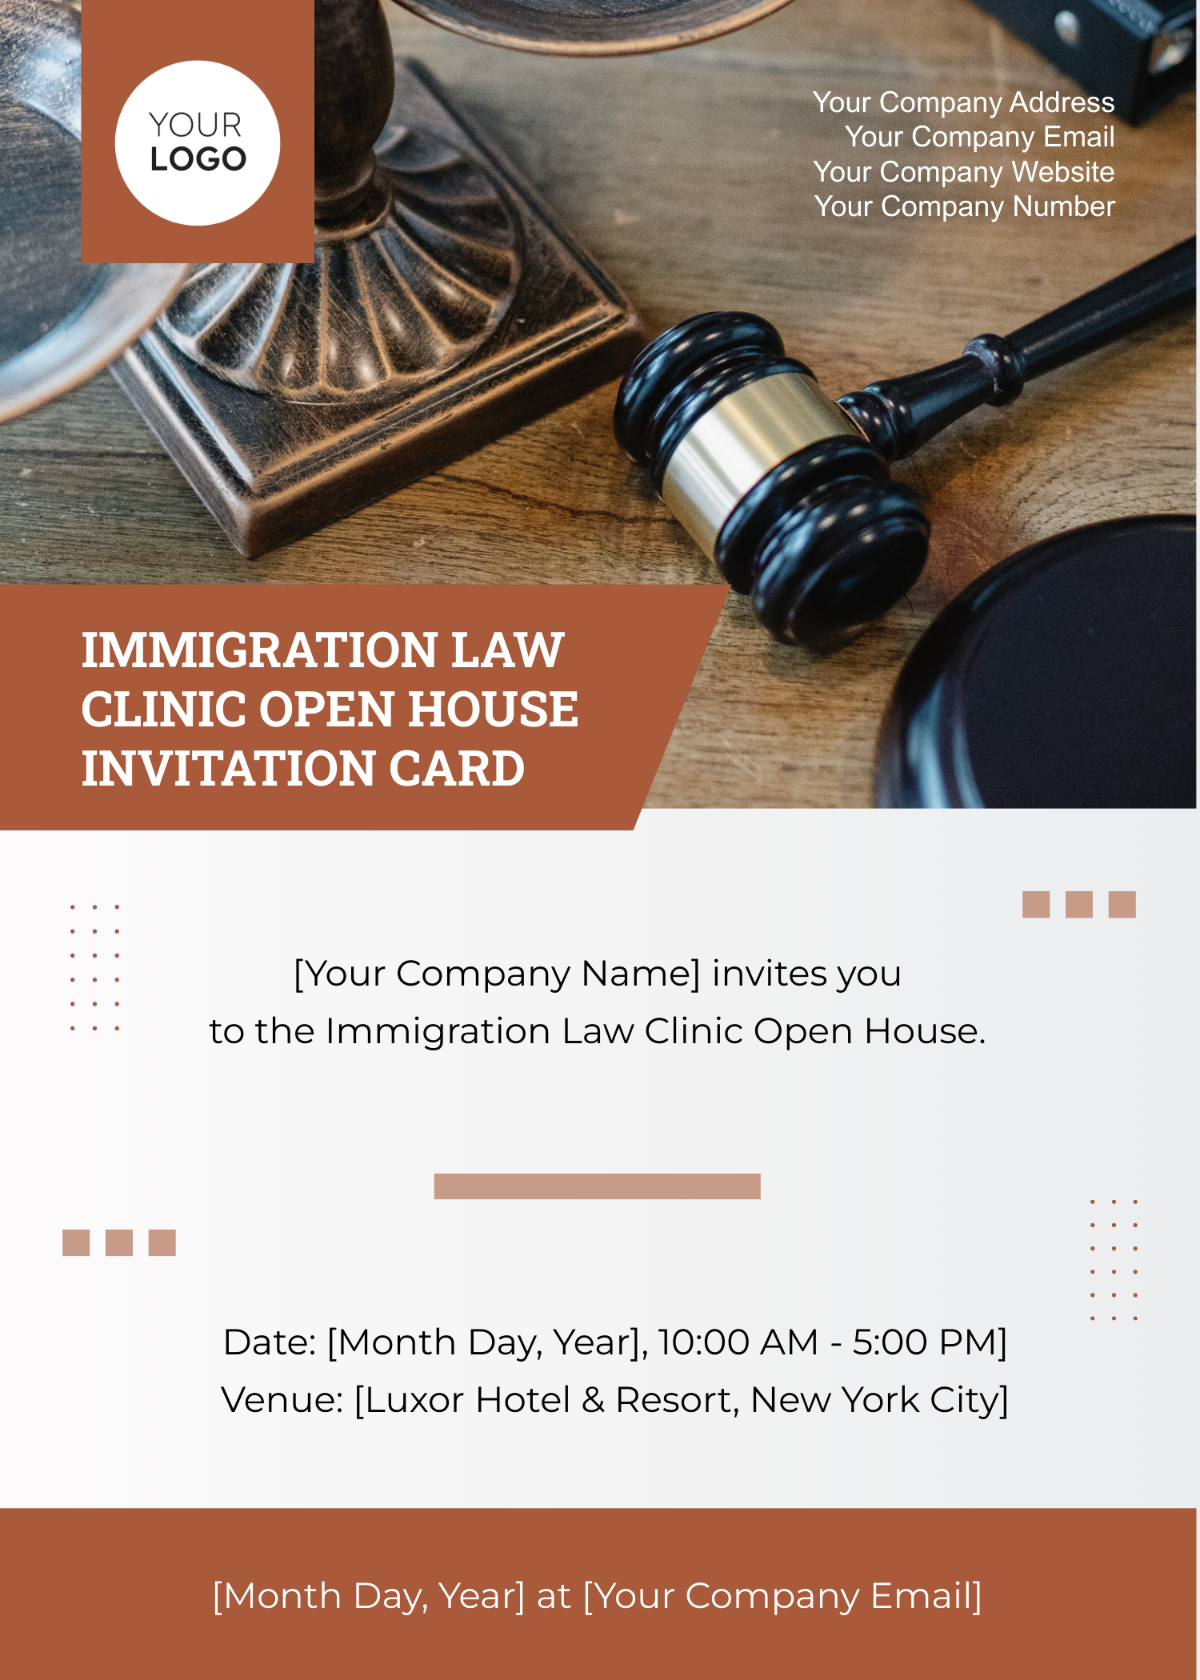 Immigration Law Clinic Open House Invitation Card